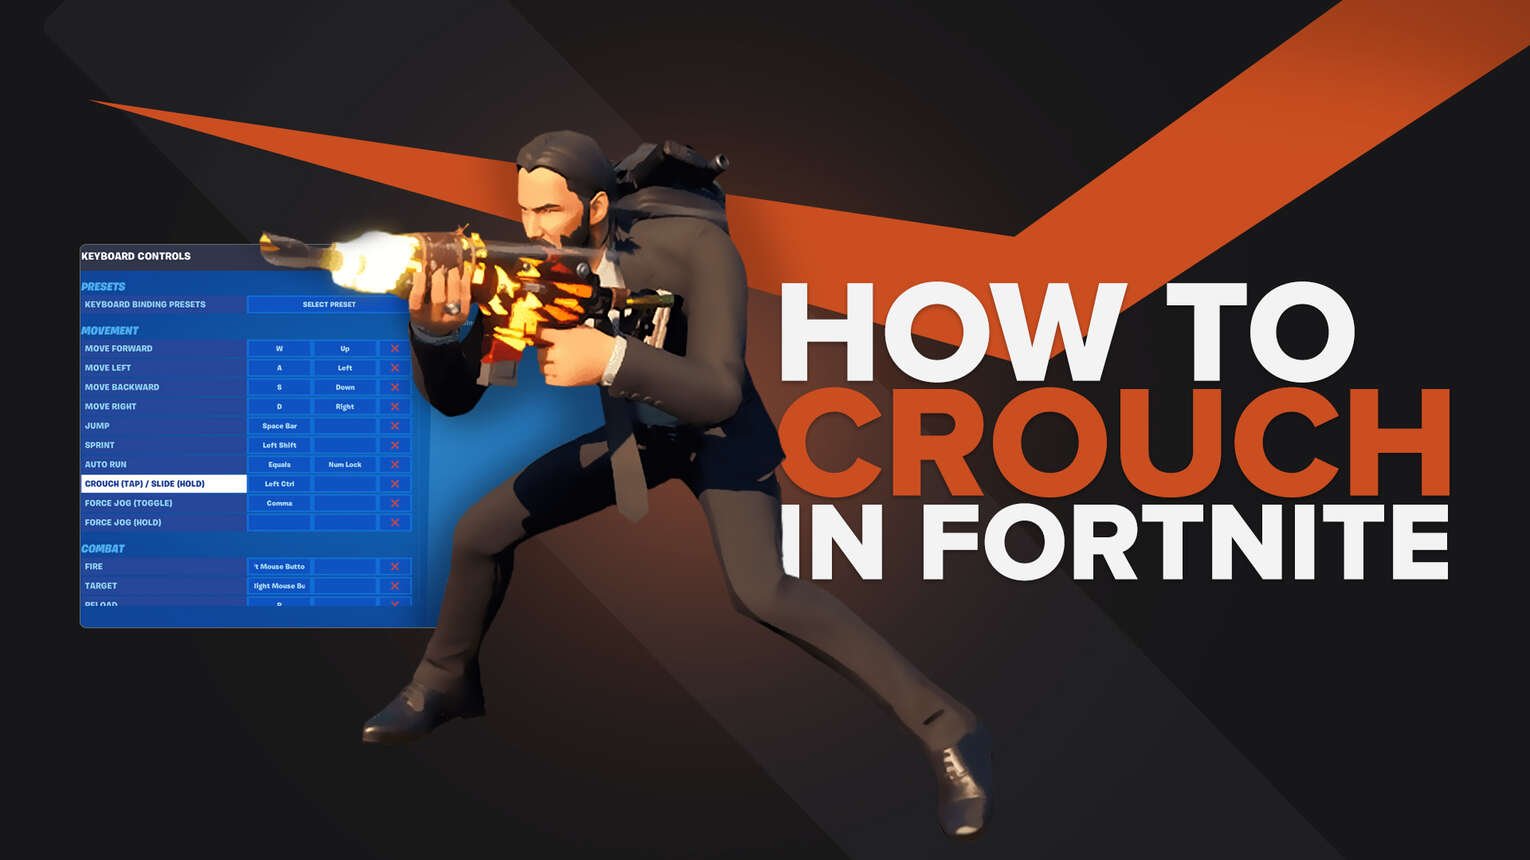 How To Crouch in Fortnite [Essential Guide]